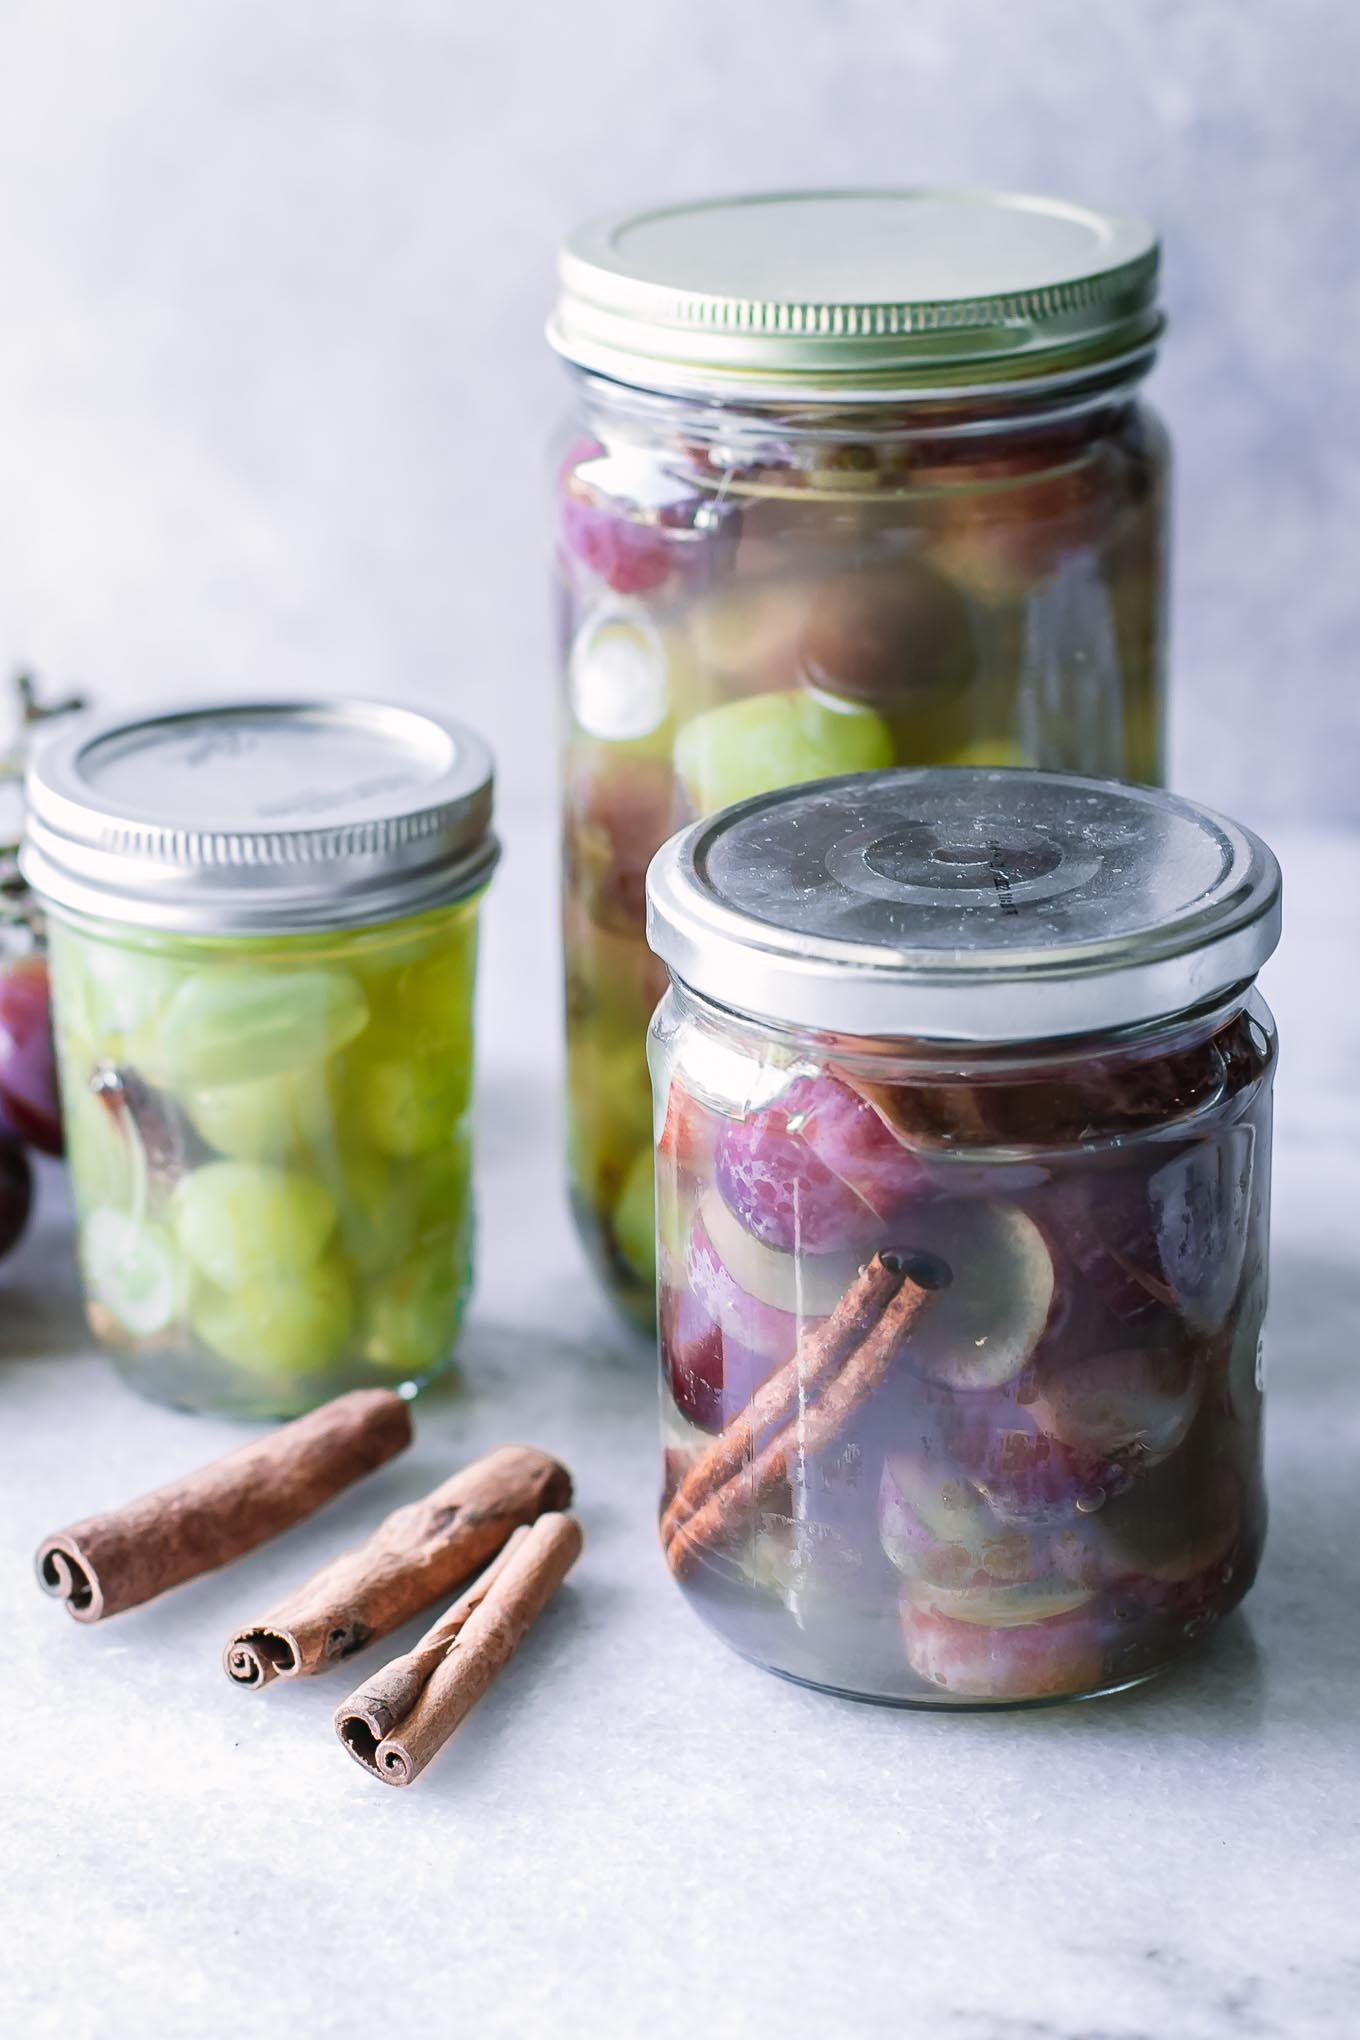 jars of green and red grapes in pickling jars on a white table